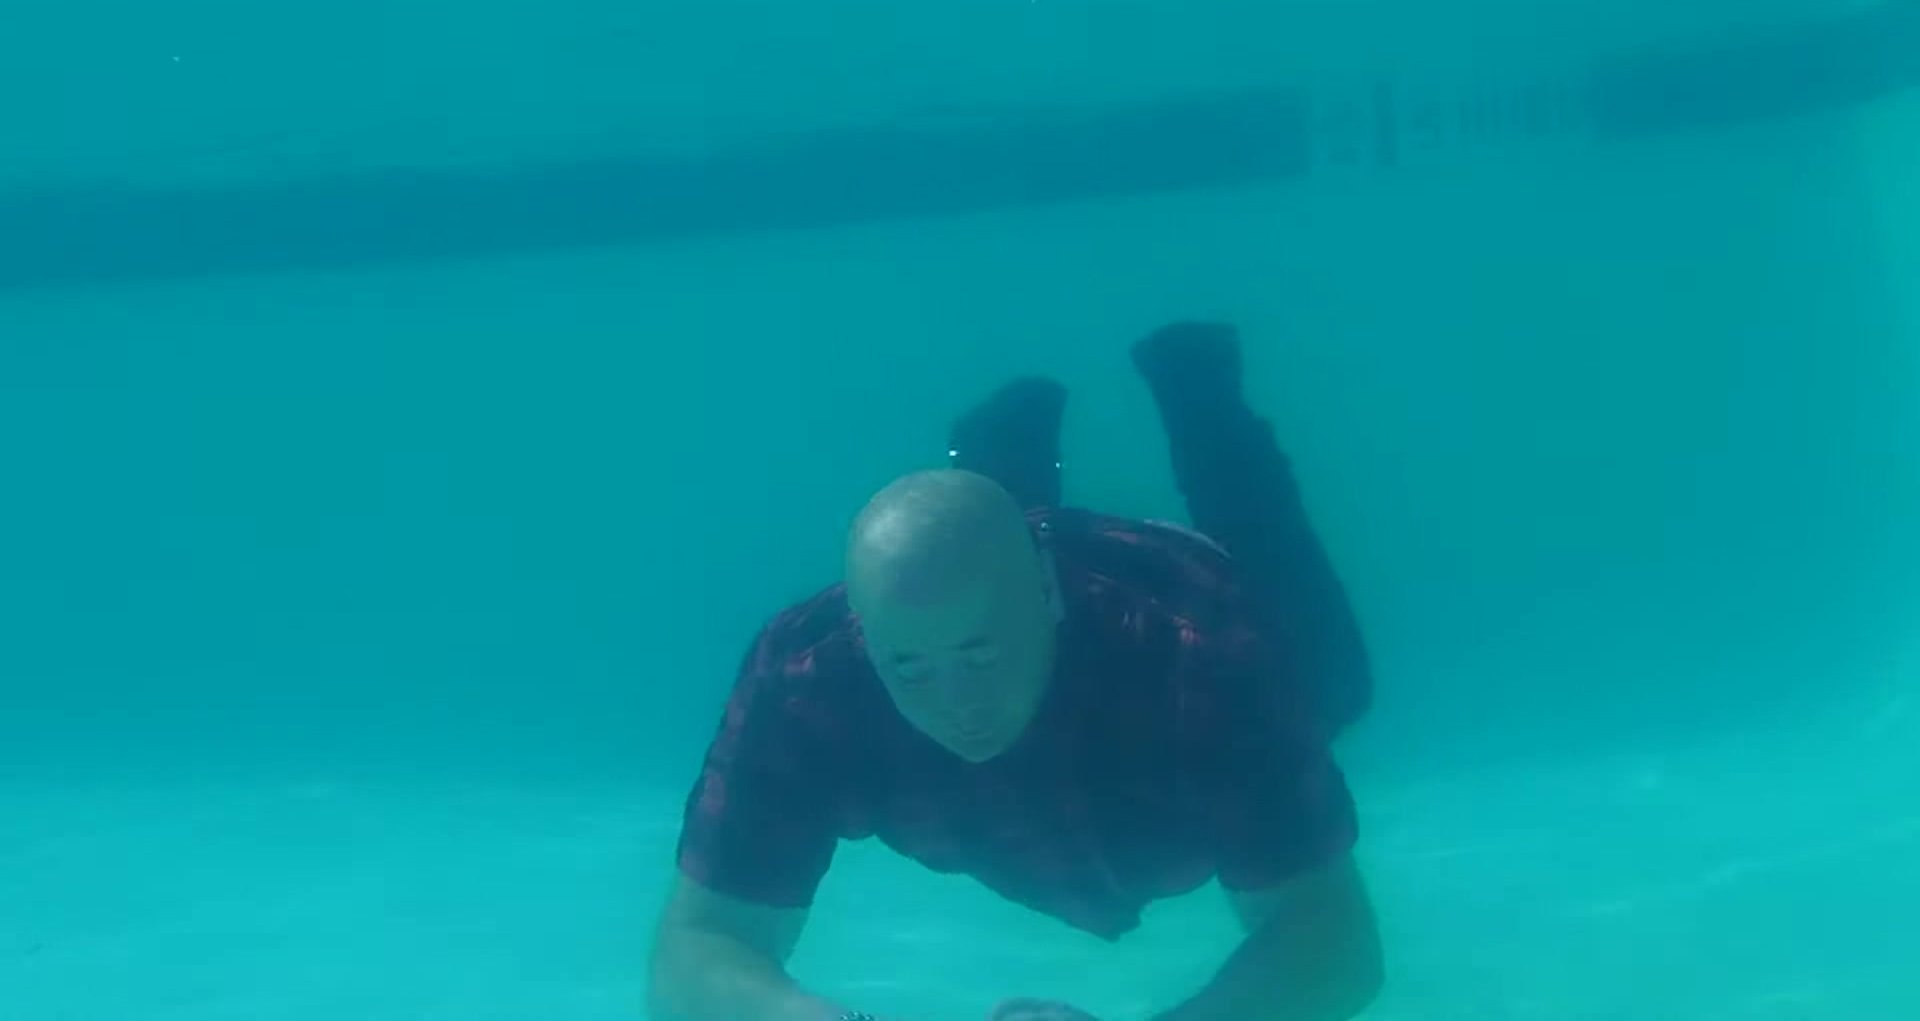 Swimming barefaced underwater fully clothed